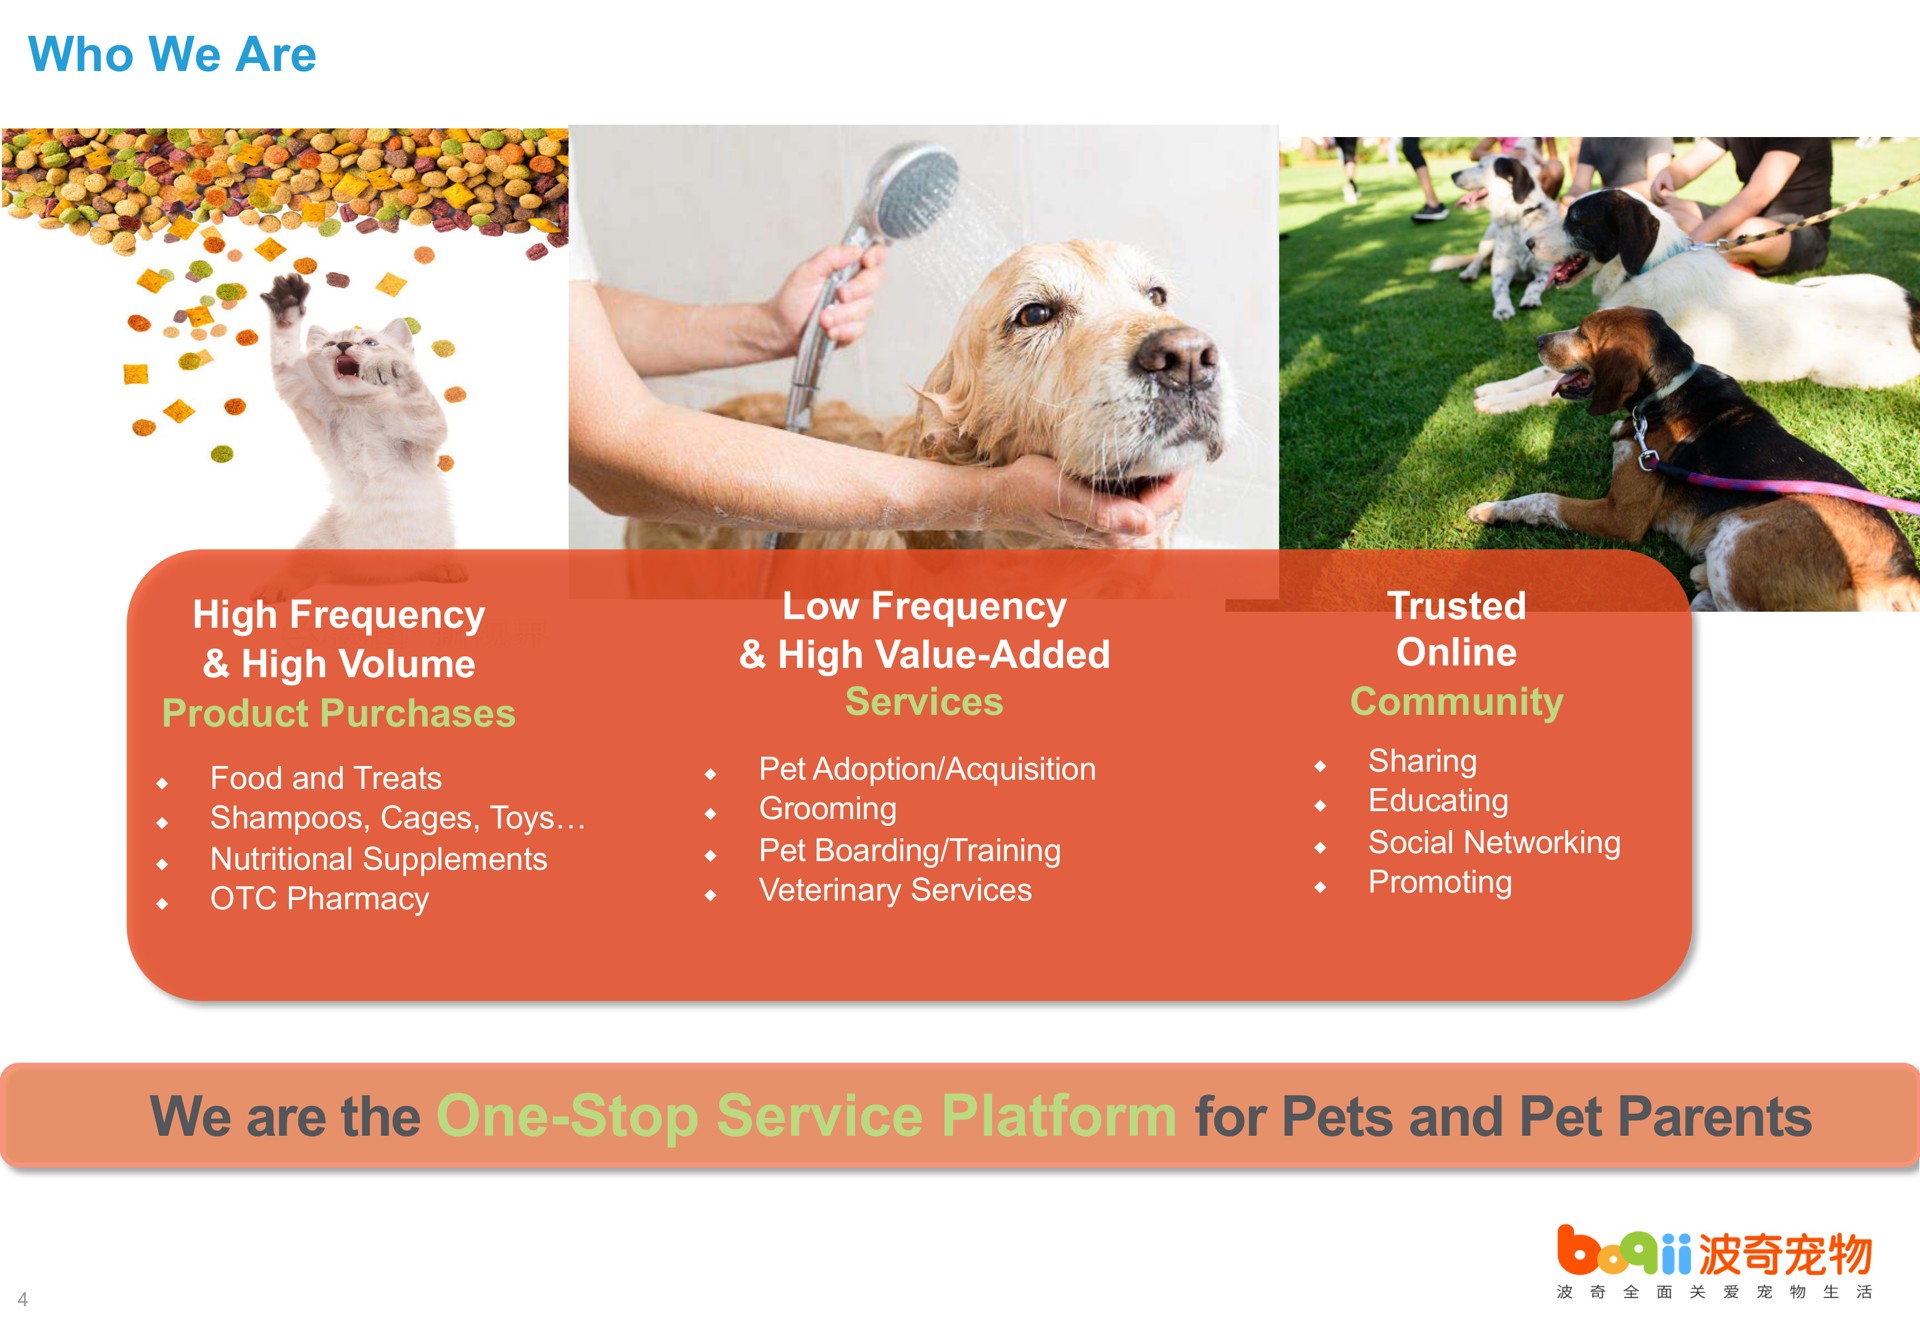 who we are we are the one stop service platform for pets and pet parents high frequency high volume product purchases nutritional supplements low frequency high value added services boarding training trusted | Boqii Holding